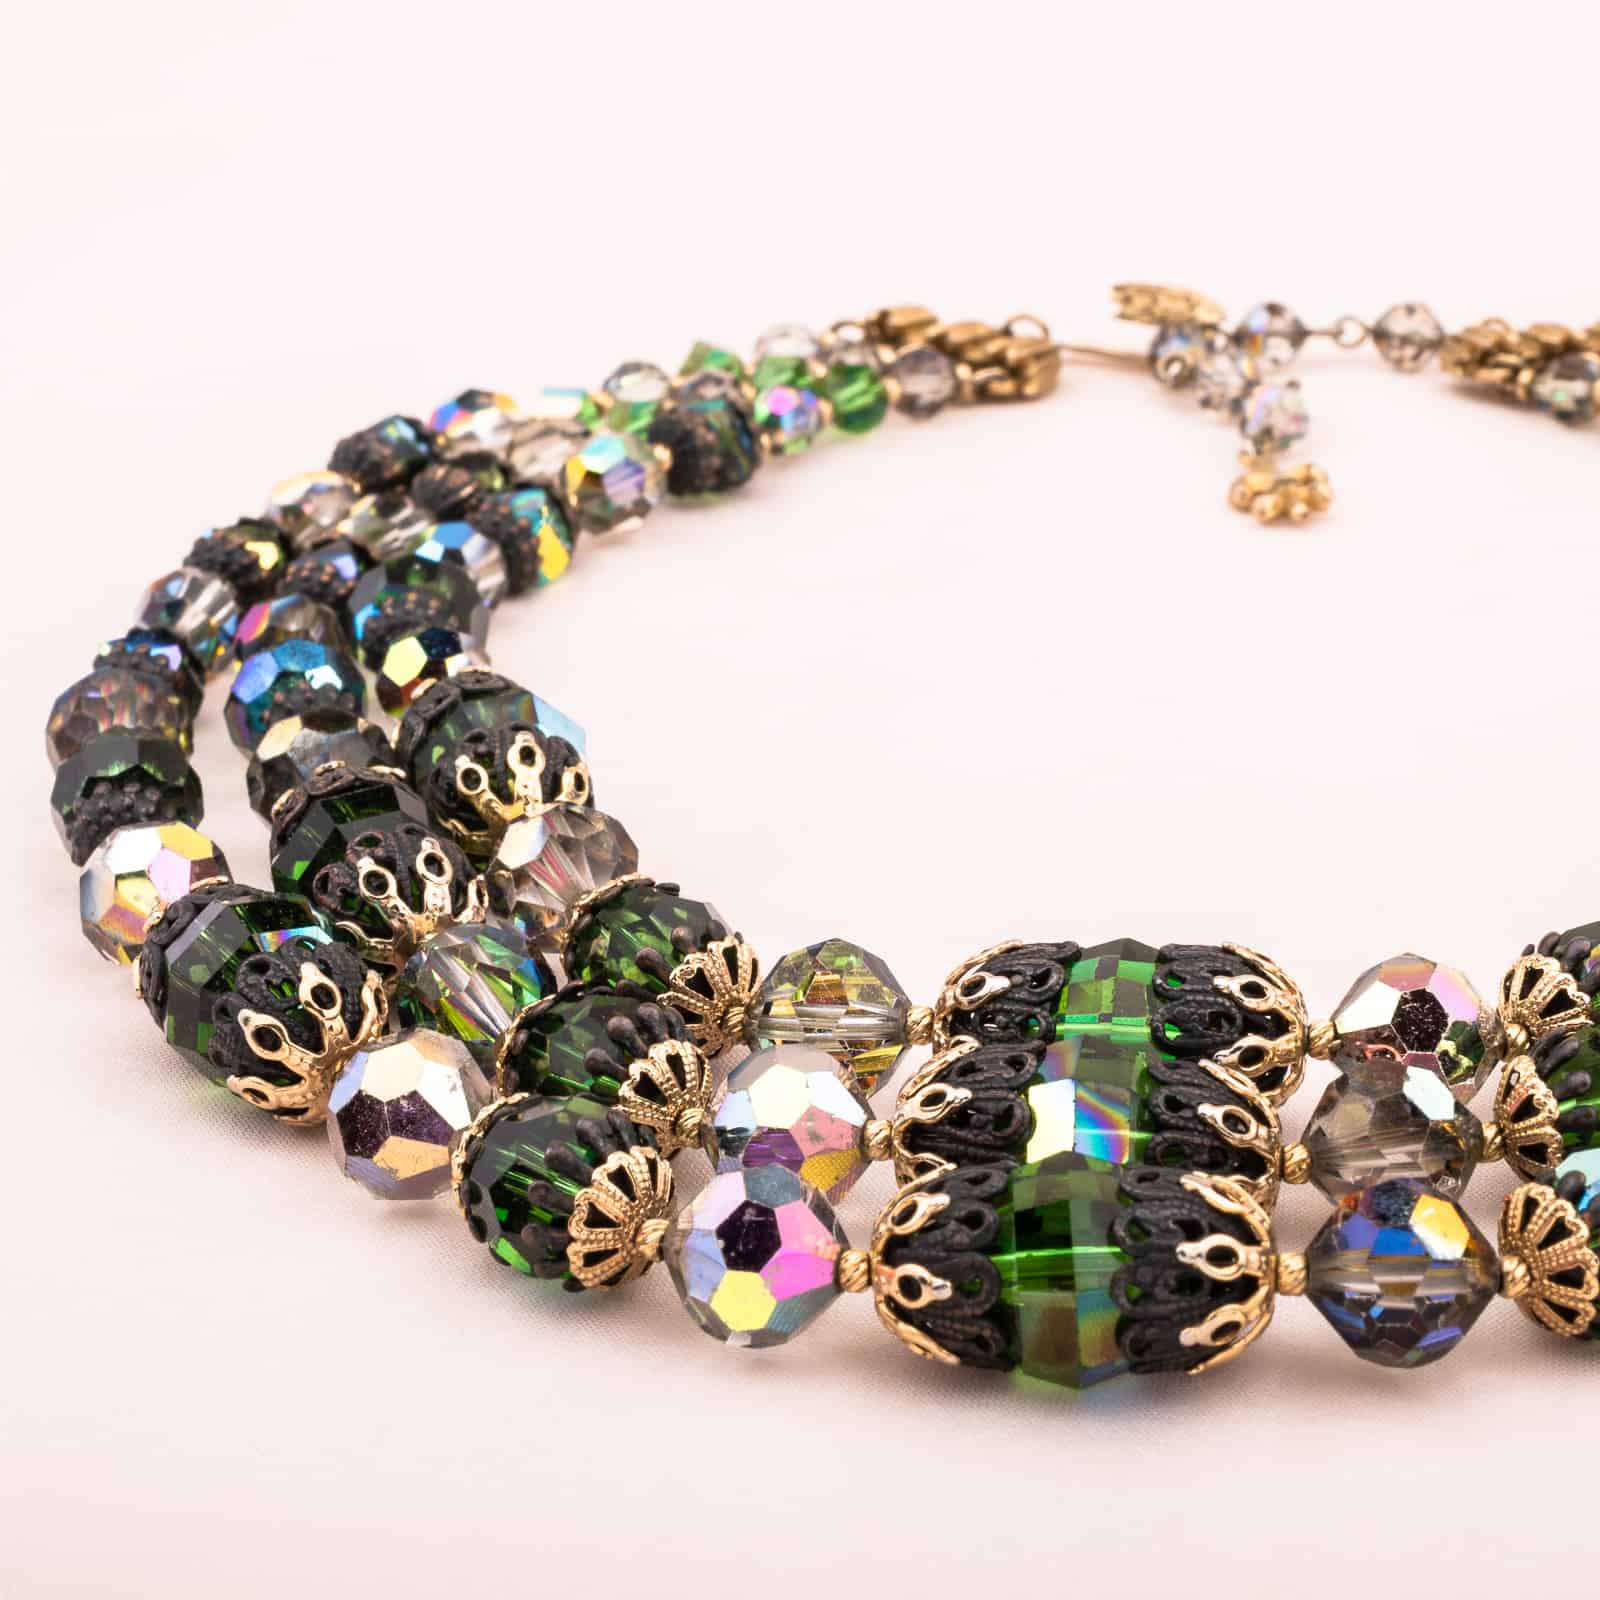 Rainbow Iridescent Crystal Glass Beads Necklace 1960s